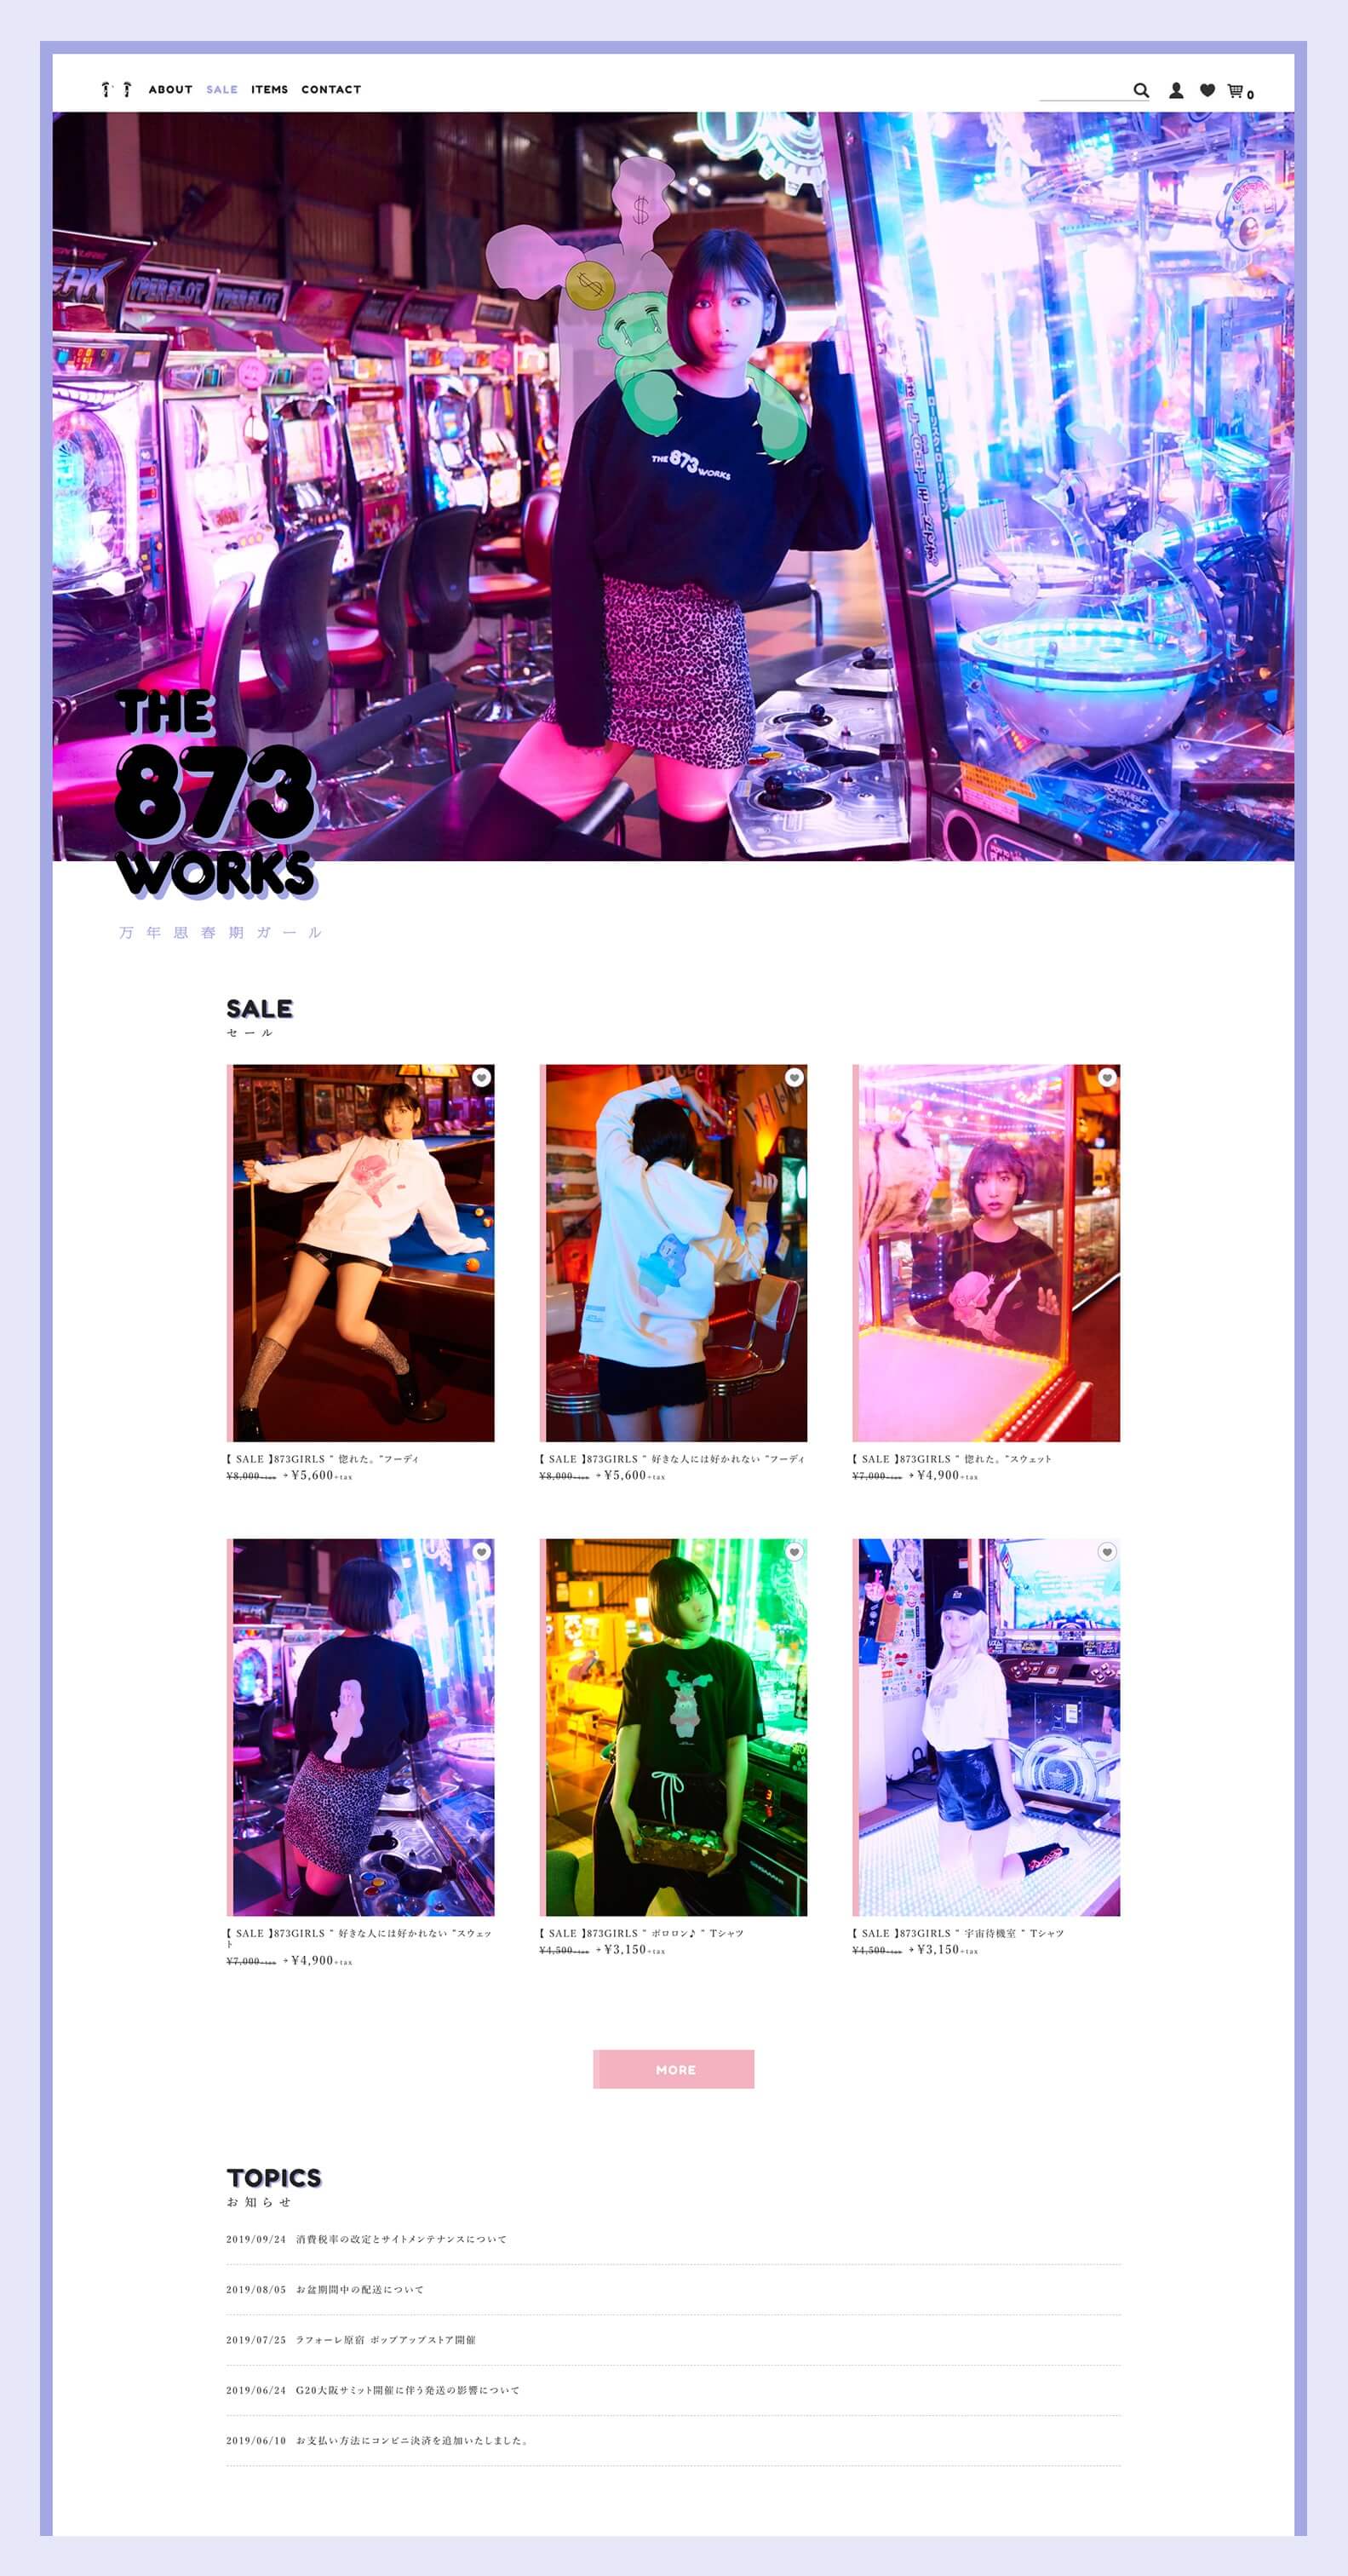 THE 873 WORKS_image5